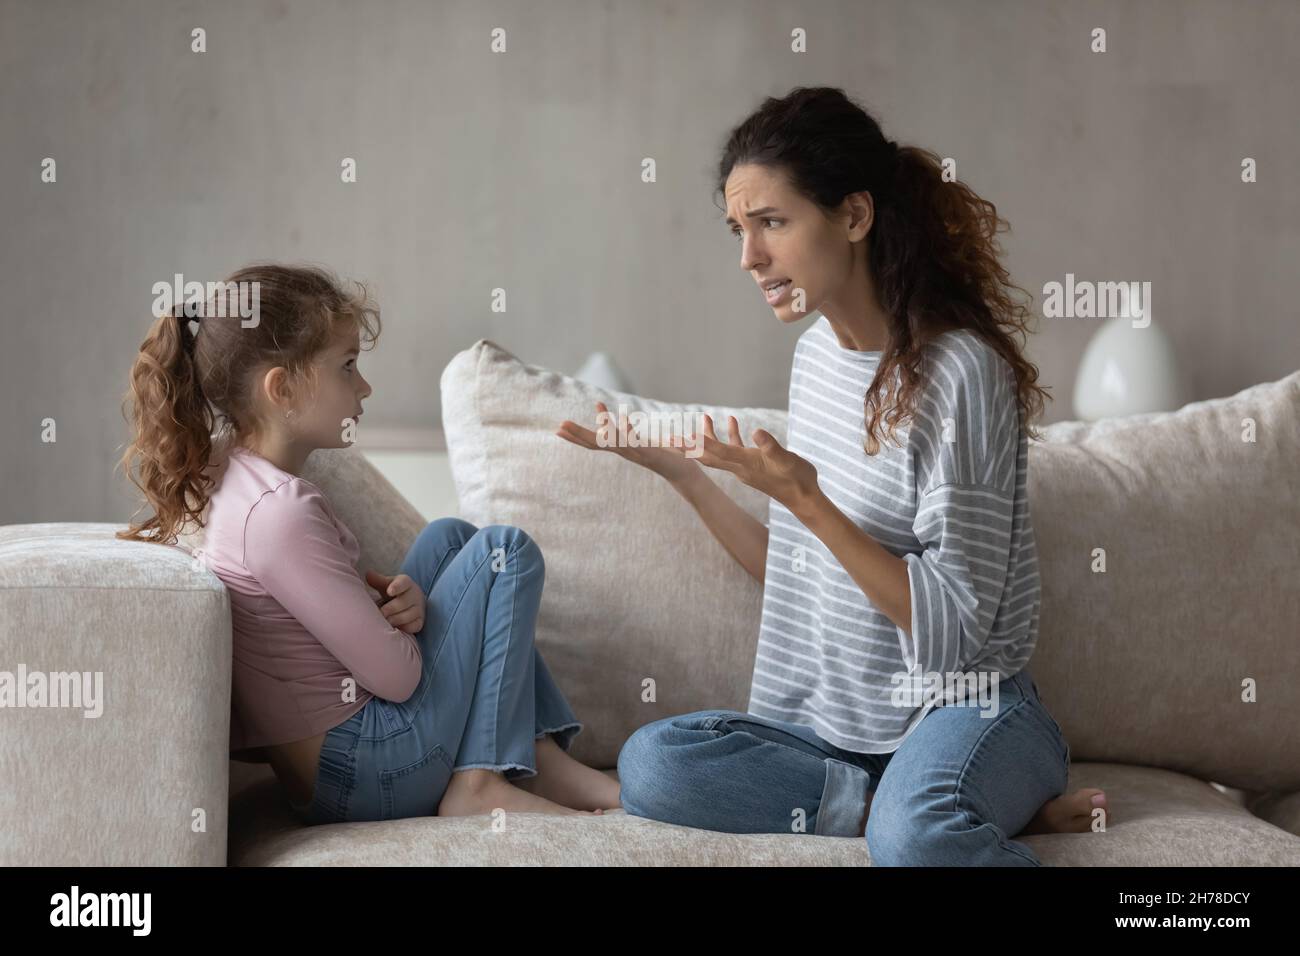 https://c8.alamy.com/comp/2H78DCY/annoyed-strict-mother-lecturing-offended-little-daughter-for-bad-behavior-2H78DCY.jpg